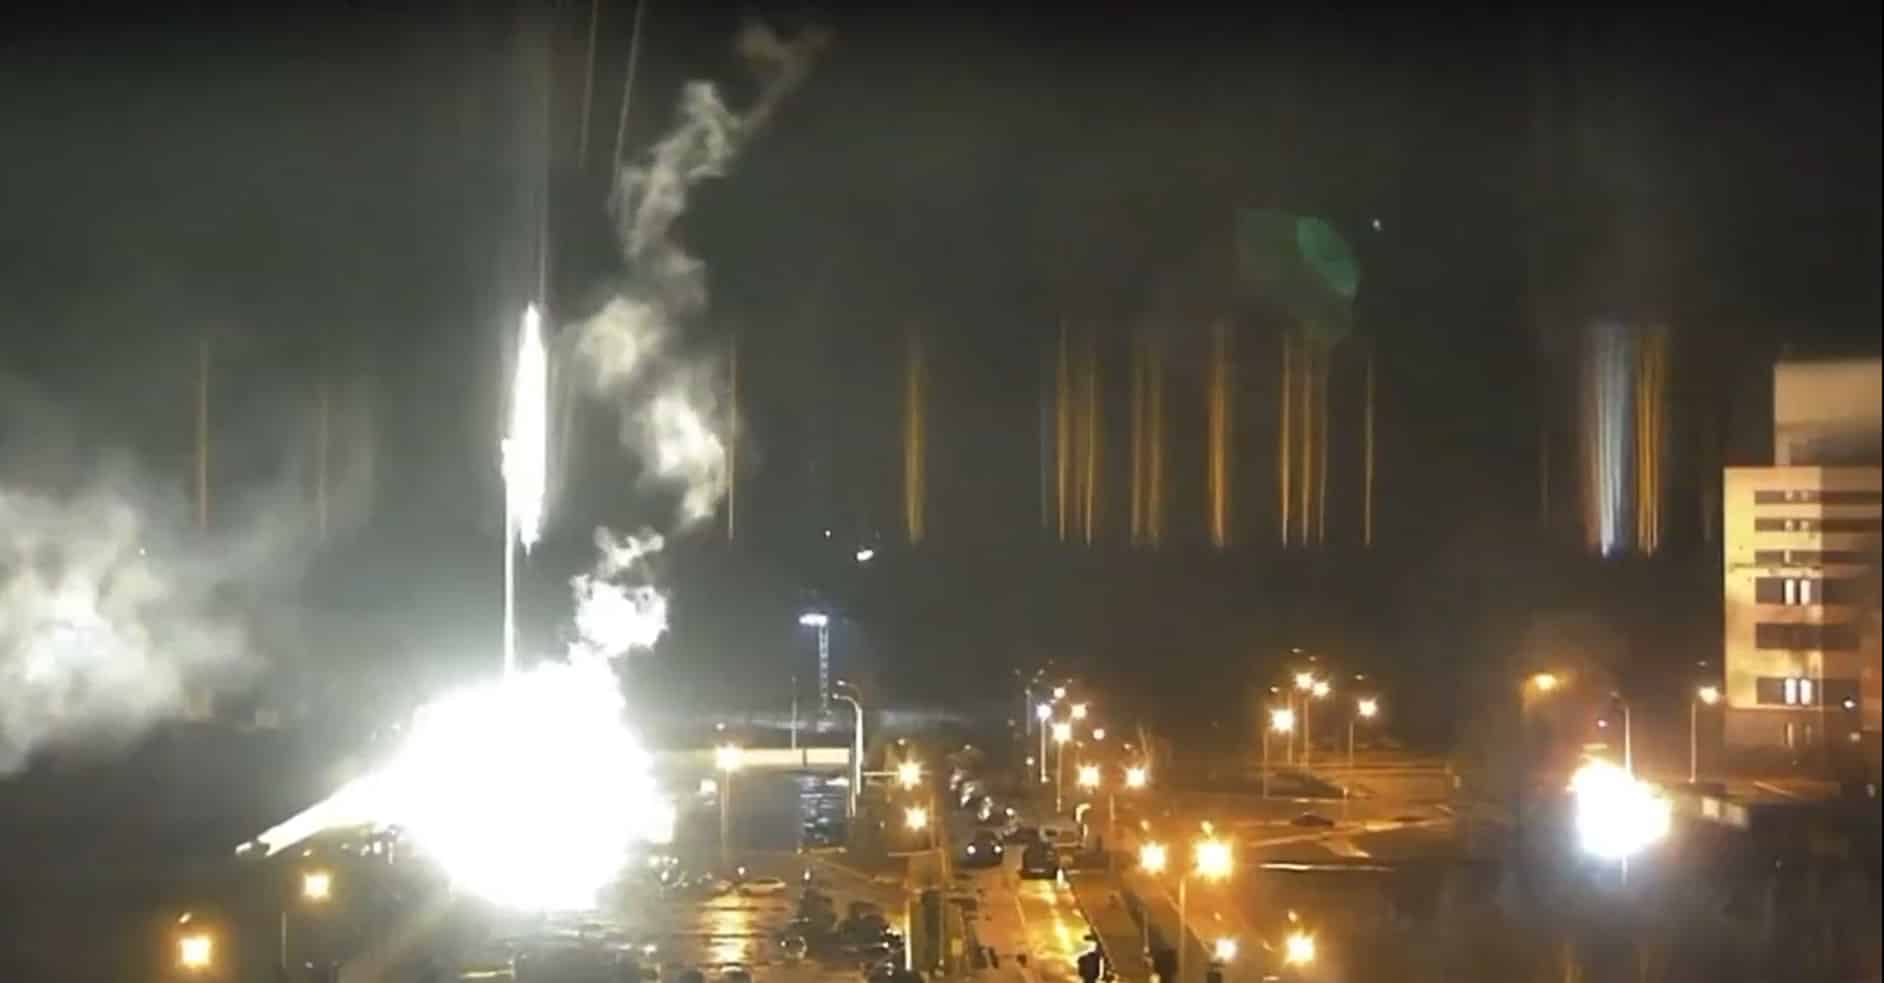 Ukraine-Russia Crisis: Europe’s largest nuclear plant Zaporizhzhia catches fire after Russian attack